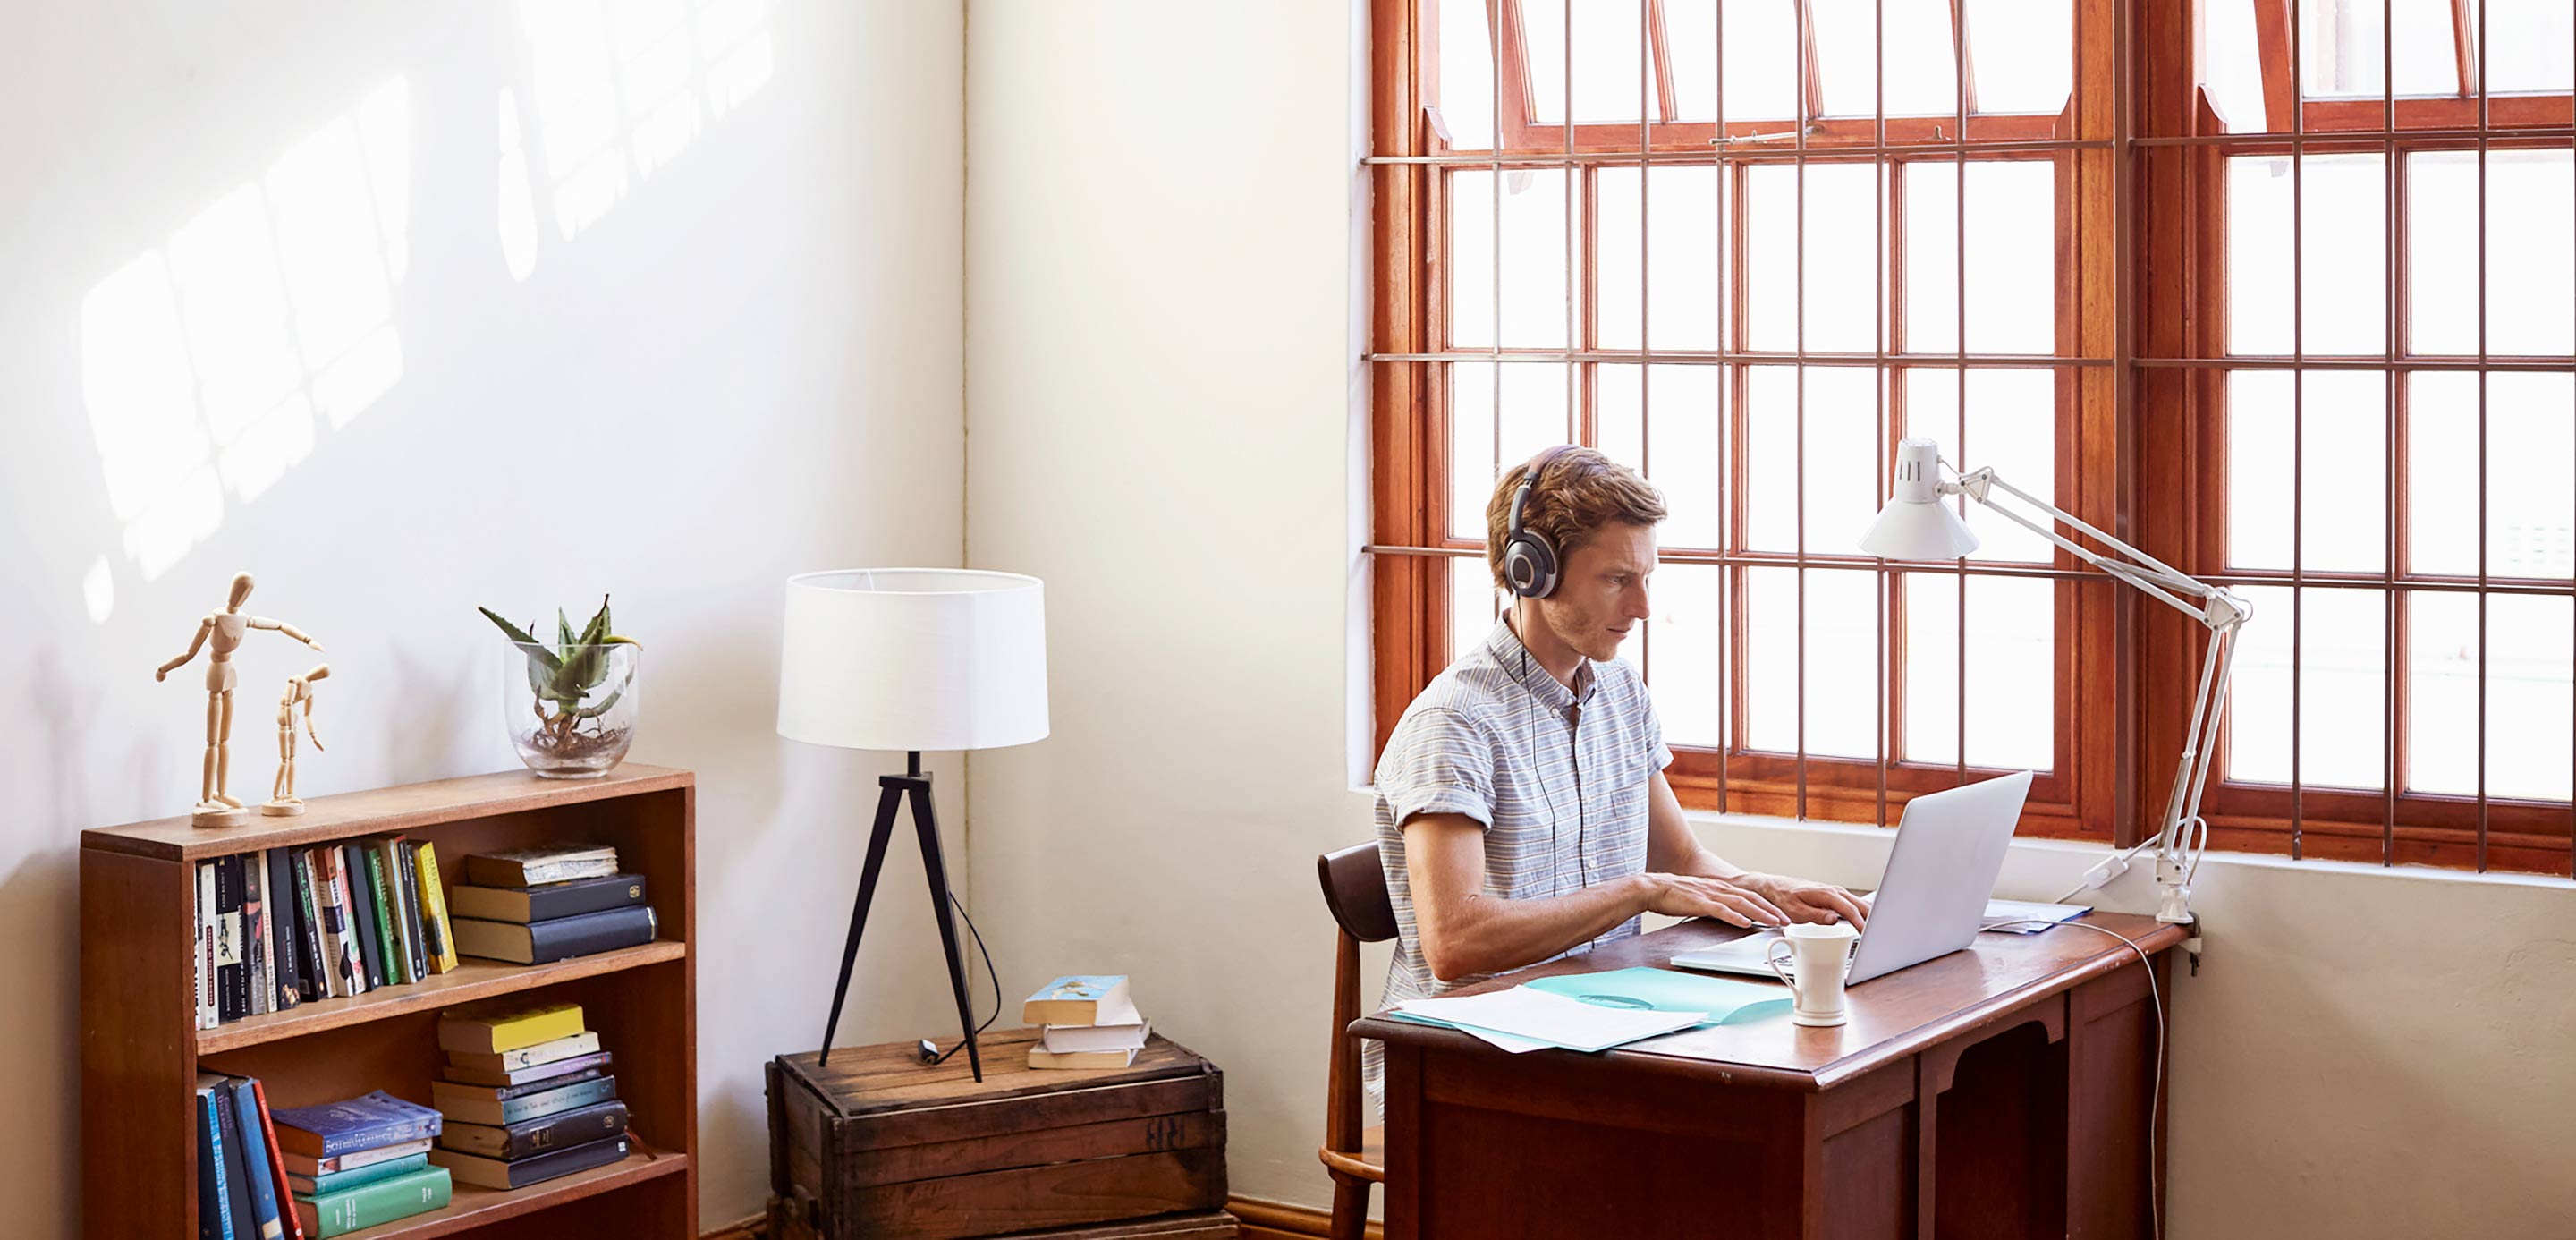 Drawing the line on digital: The pros and cons of remote working